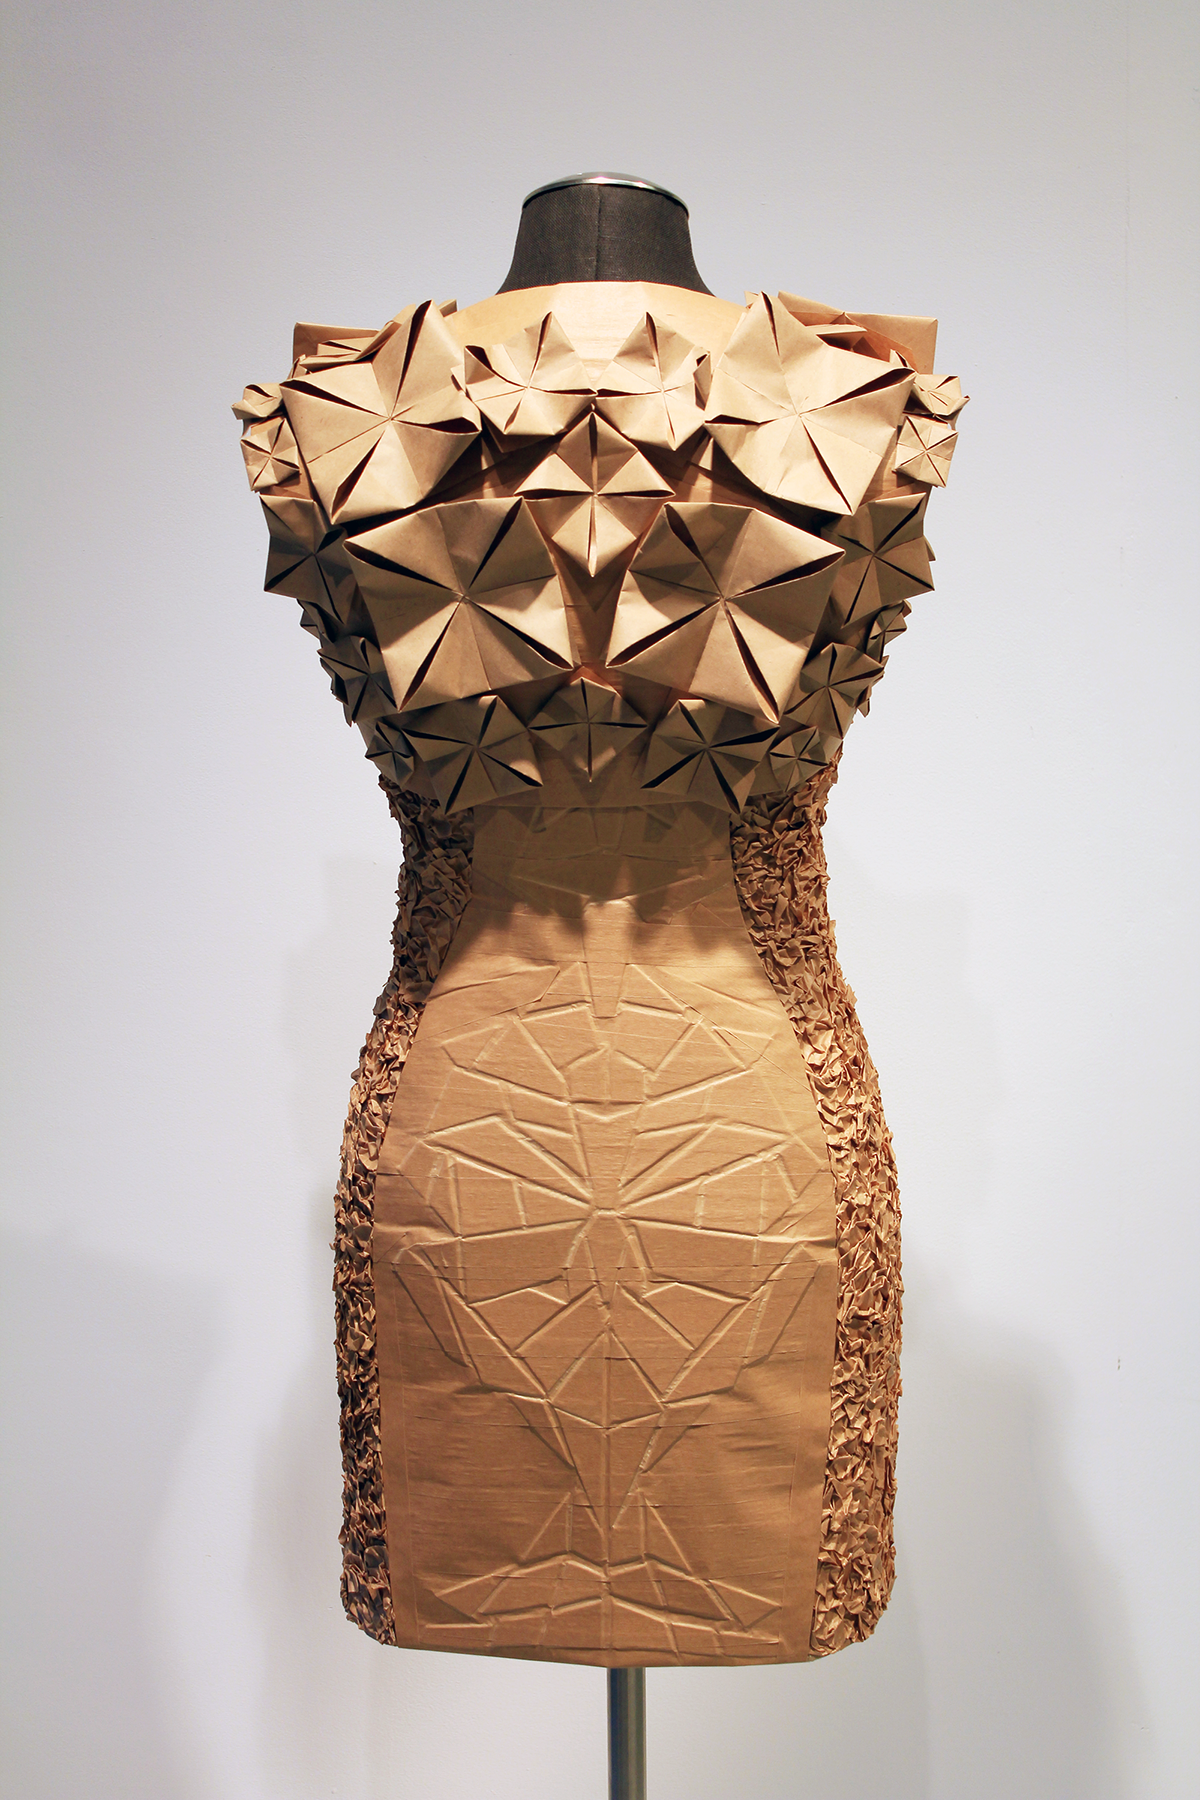 Handcrafted paper gowns on display in Vancouver - Agassiz-Harrison Observer